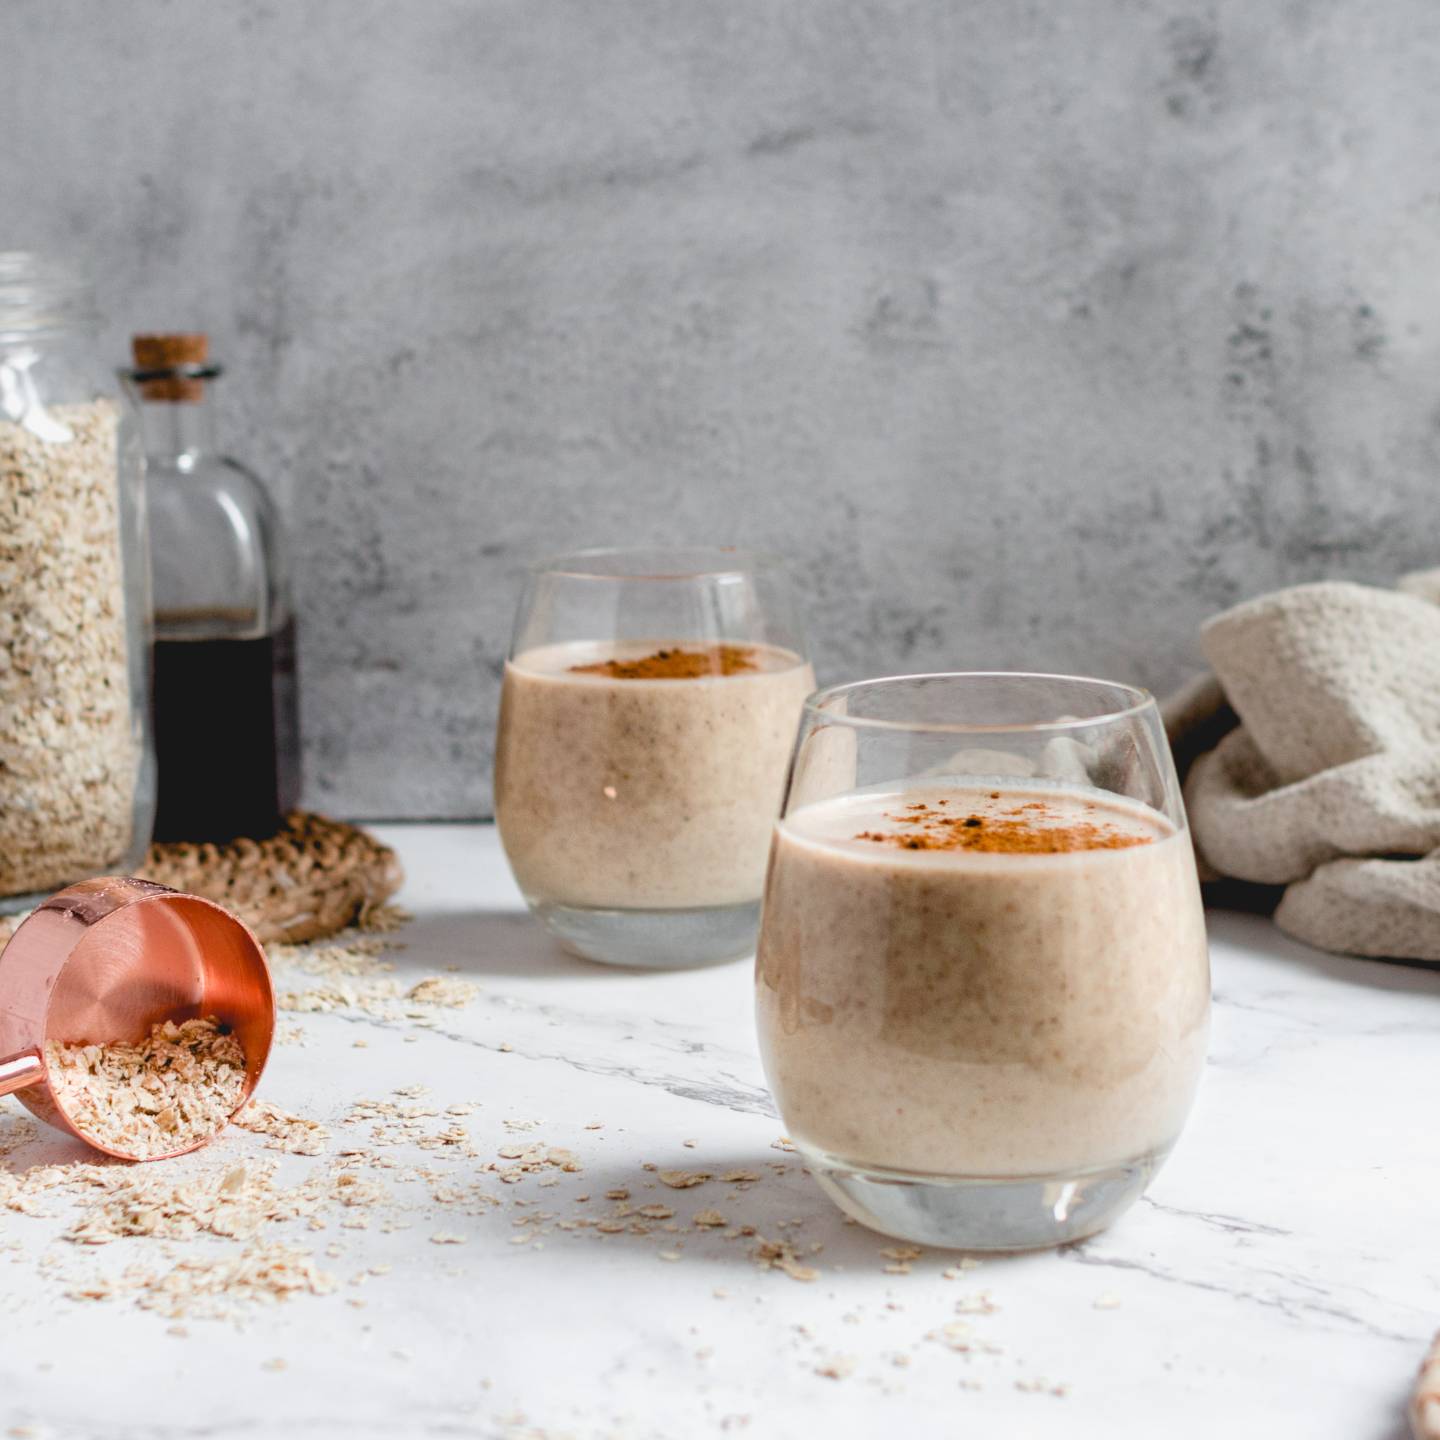 Creamy banana oatmeal smoothie with bananas, oats, almond milk, and almond butter blended and served in two glasses.